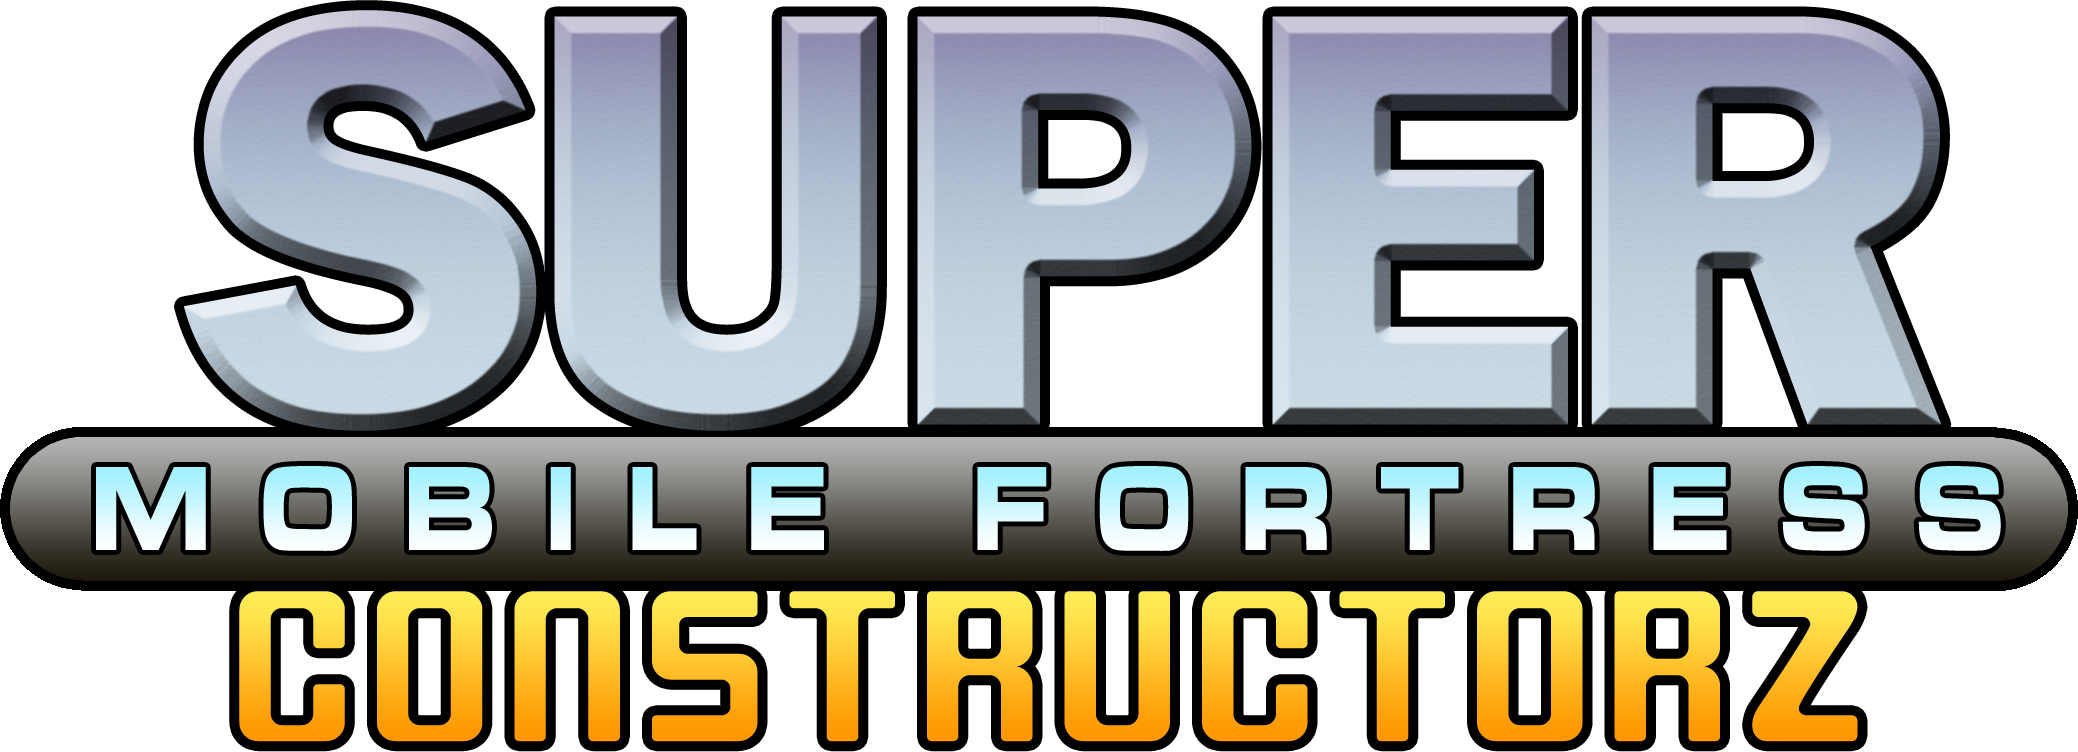 SUPER MOBILE FORTRESS CONSTRUCTORZ